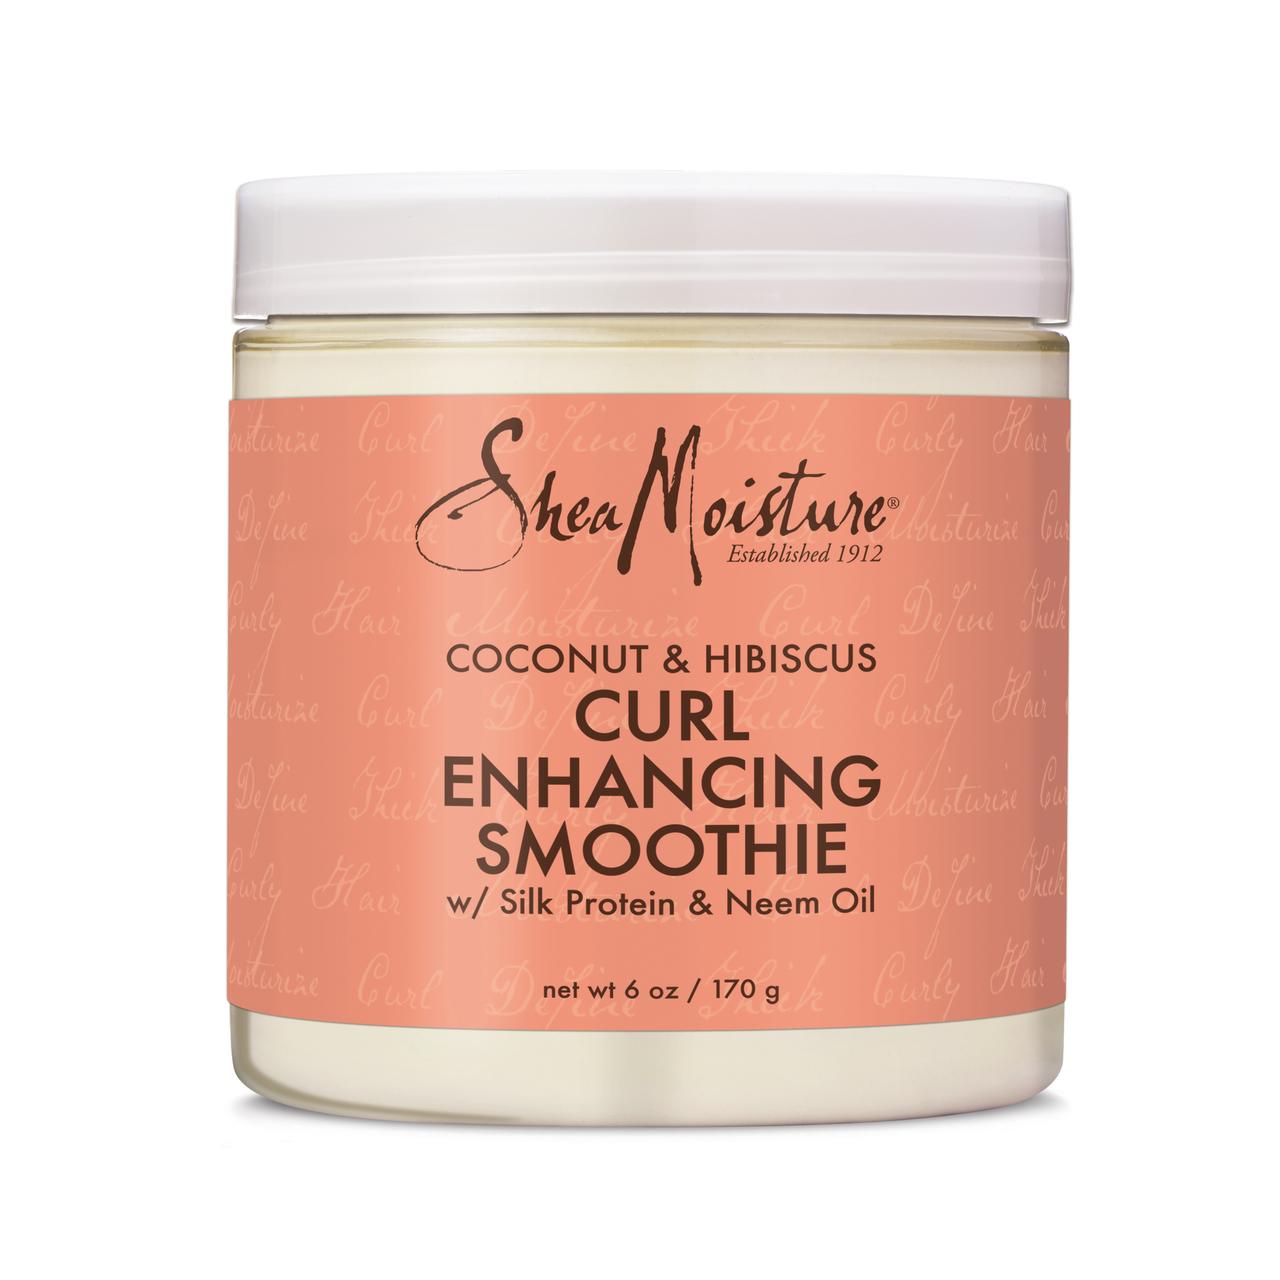 SheaMoisture Coconut & Hibiscus Curl Enhancing Smoothie for Thick, Curly Hair, 6 oz - image 1 of 9